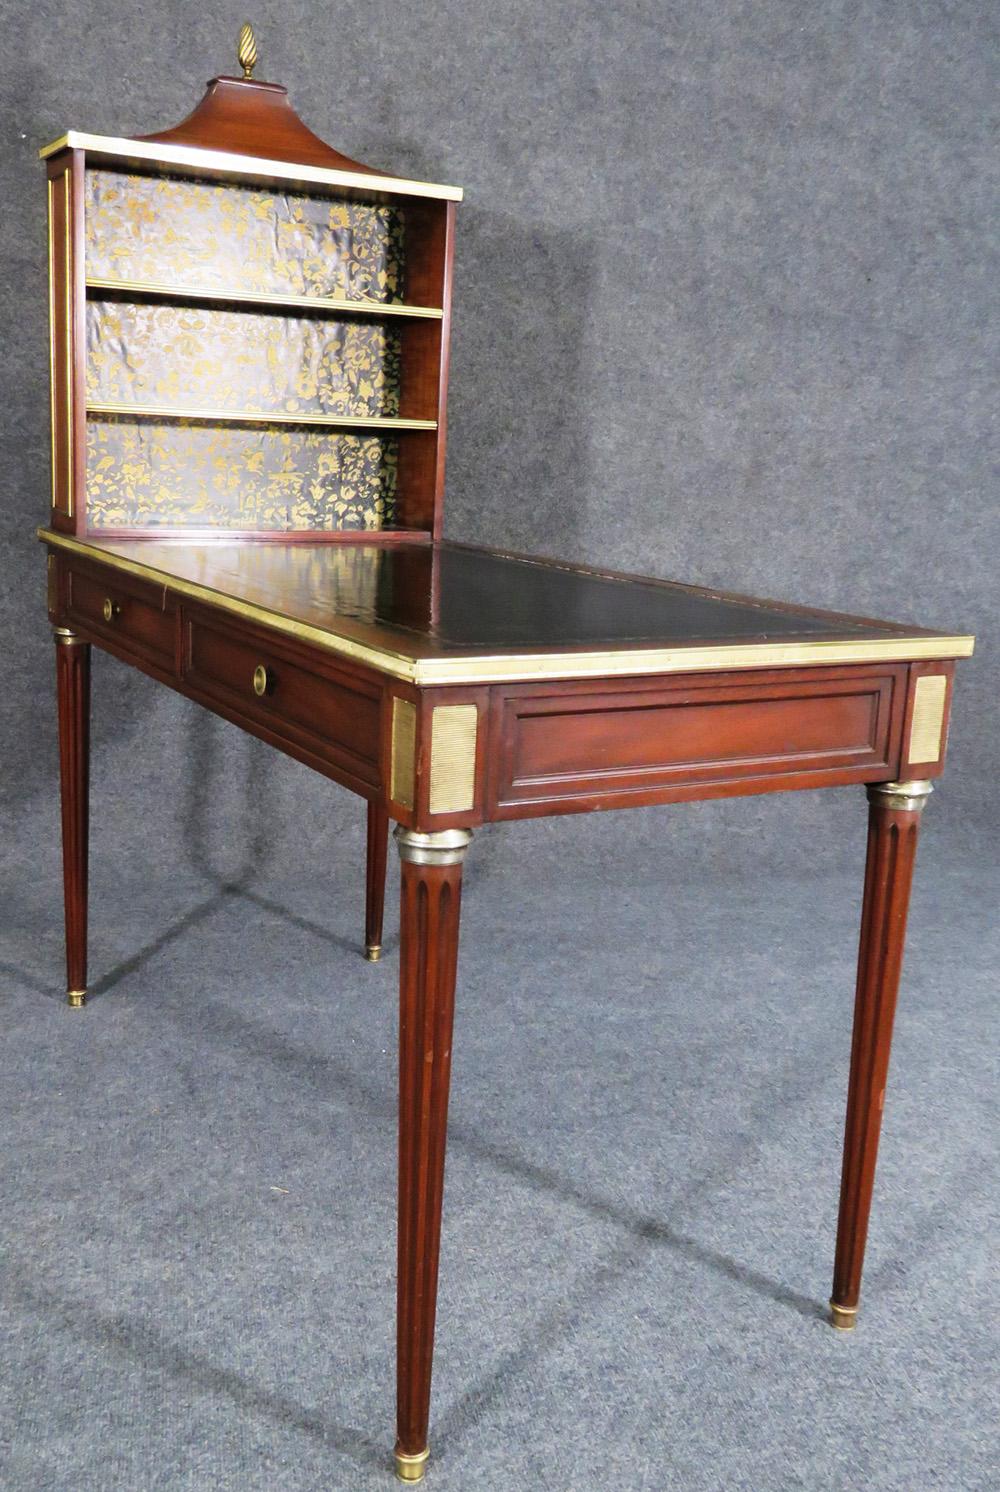 French Rare Signed Maison Jansen Leather Top Brass Mounted Cartonnier Writing Desk